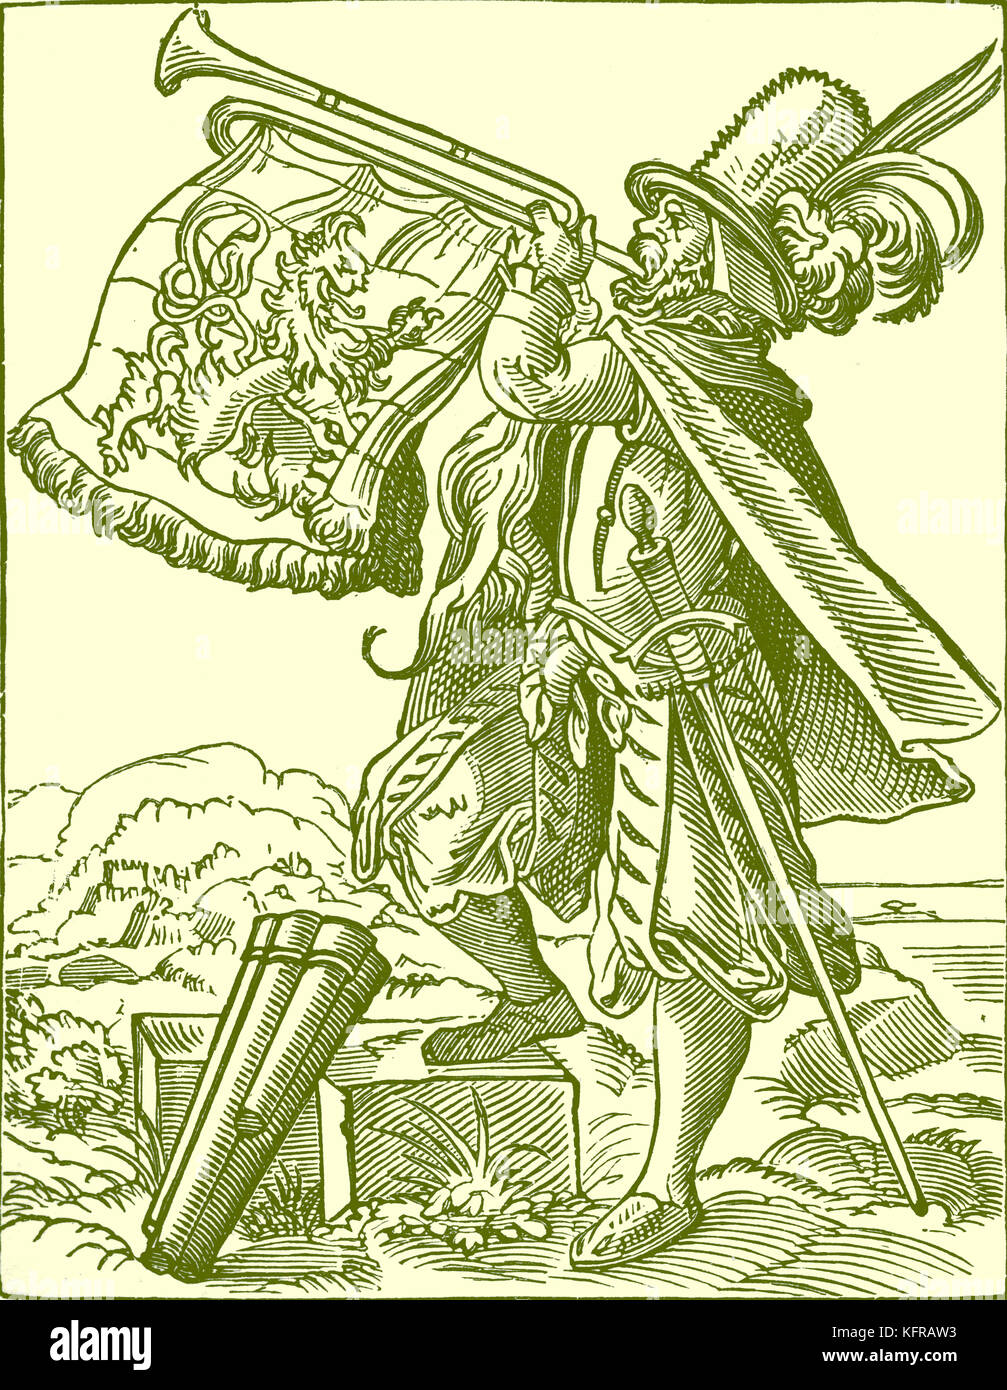 German playing a military trumpet by Jost Amman, reproduced from a sixteenth century engraving. Swiss artist, 13 June, 1539 - 17 March, 1591. Stock Photo